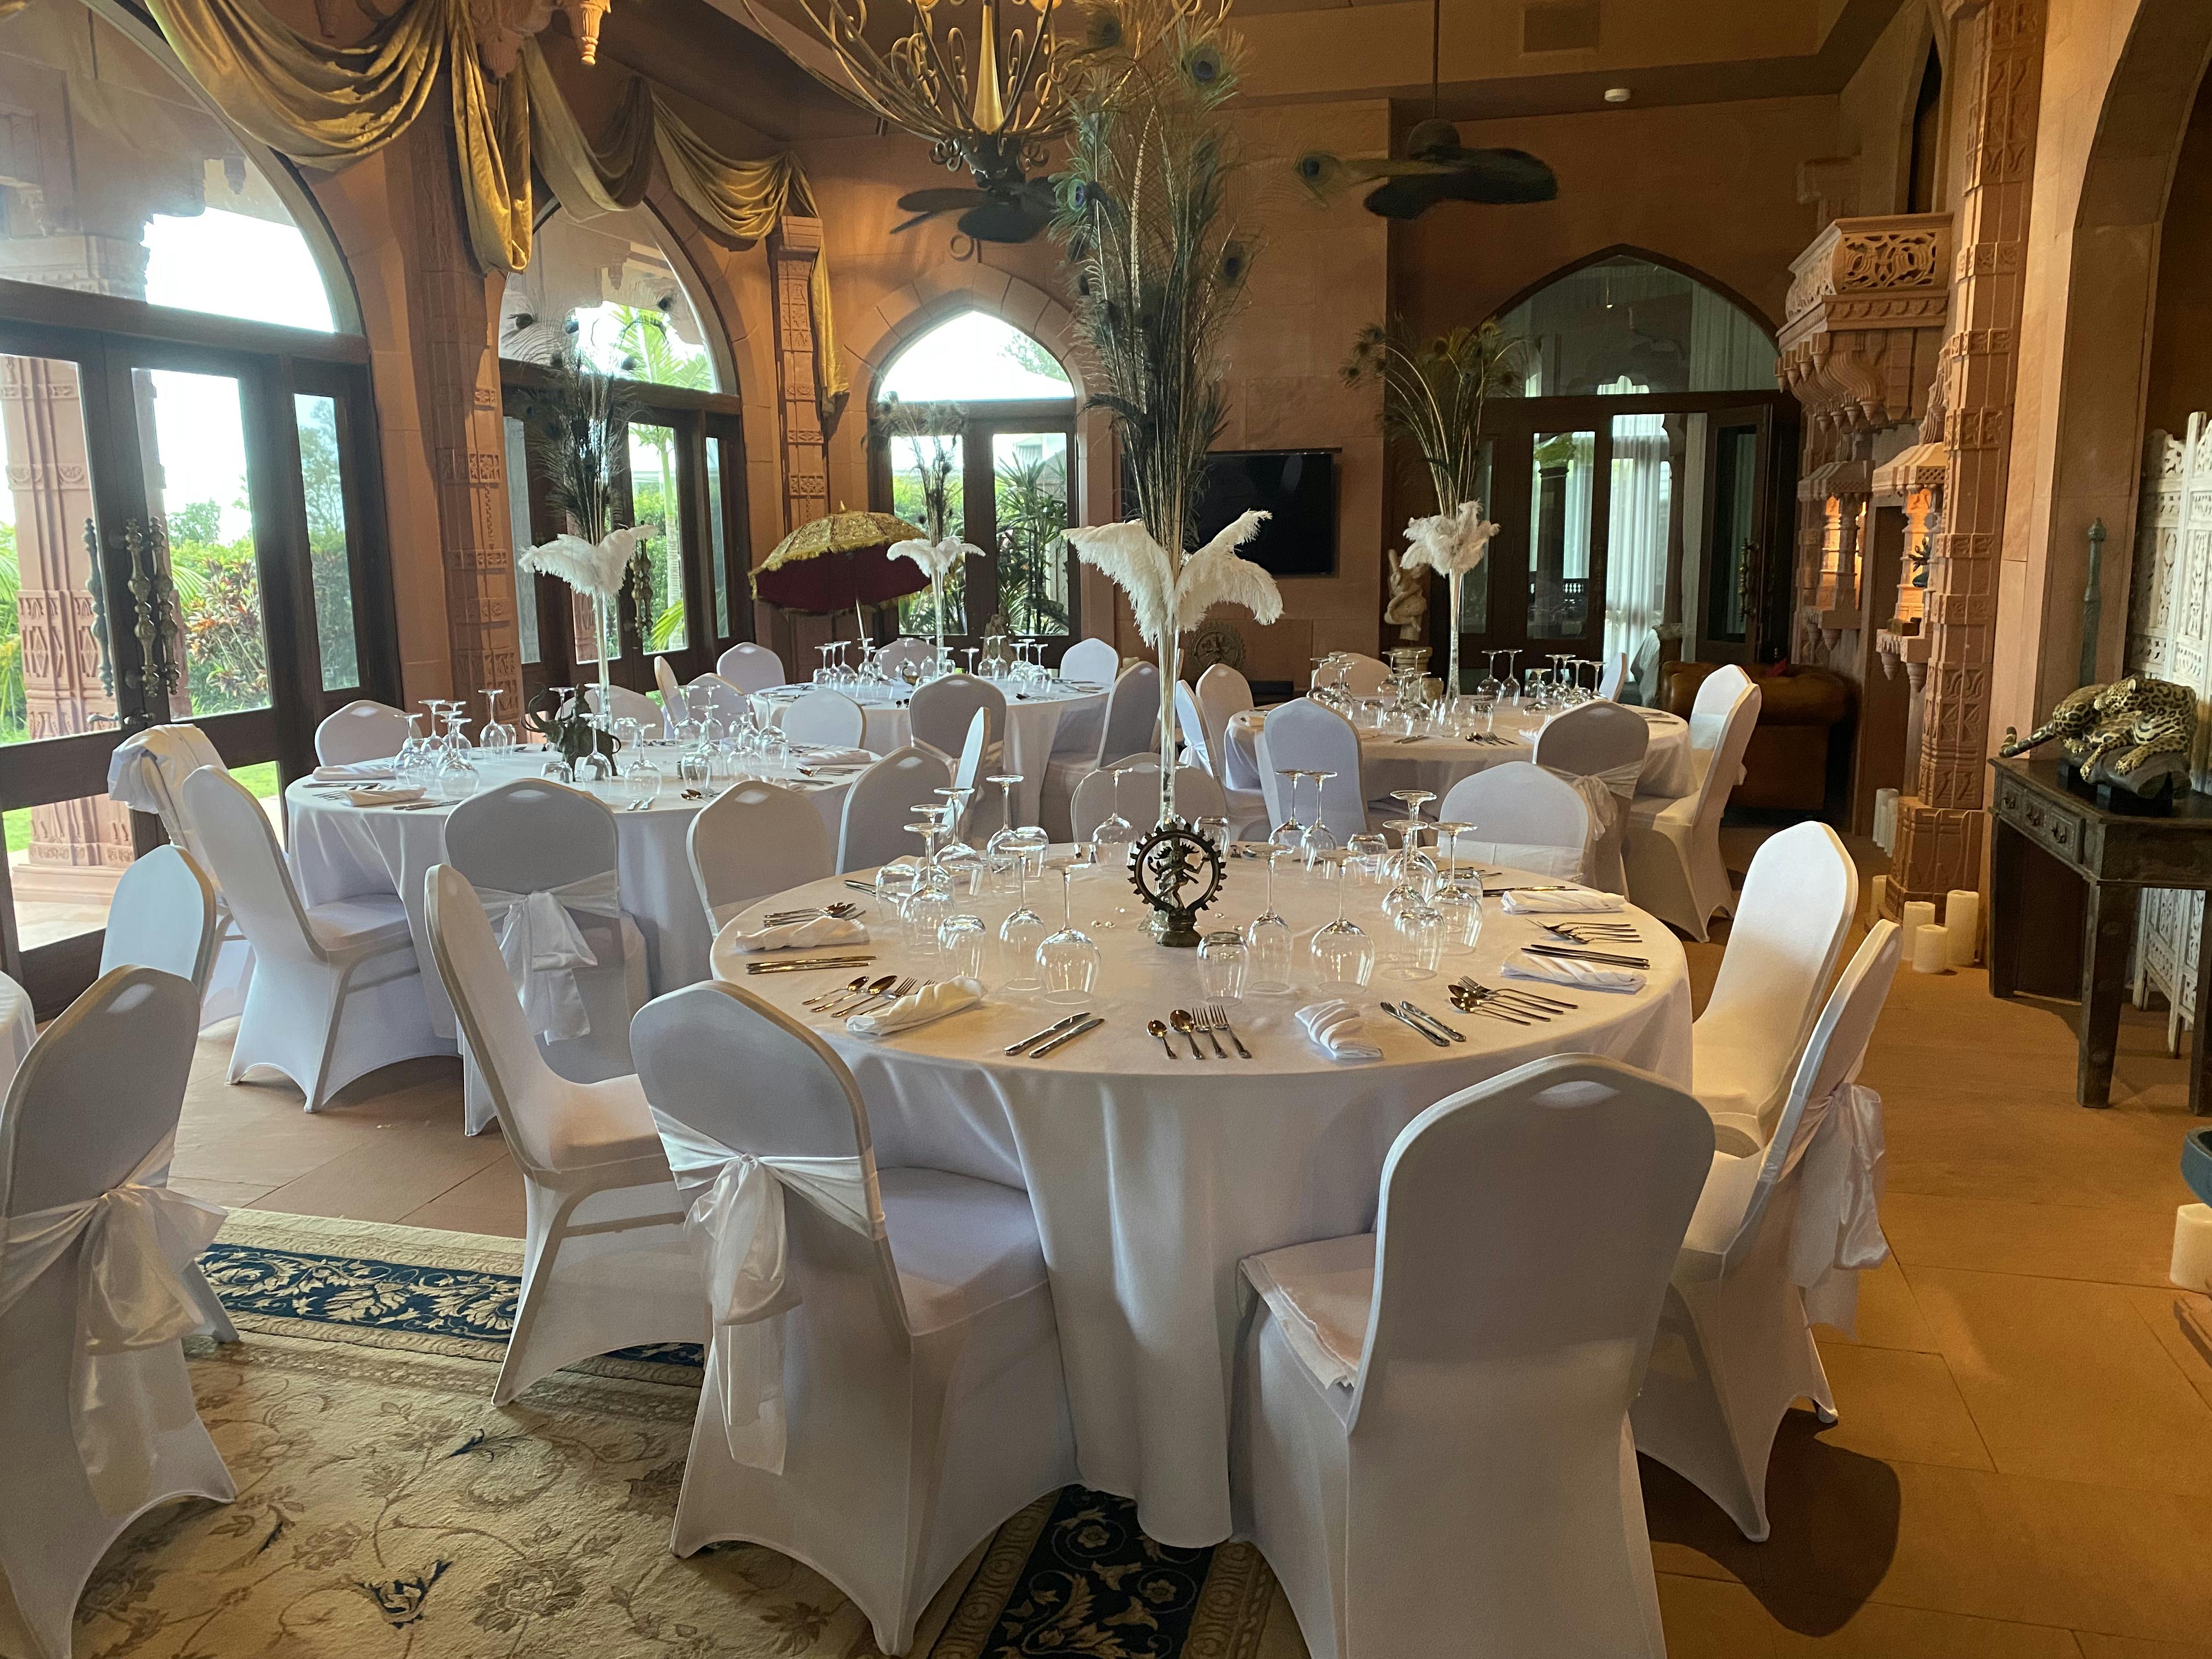 Best glassware, best cutlery, best dinnerware, best banquet chairs, beautiful centre pieces, in magnificent palace room